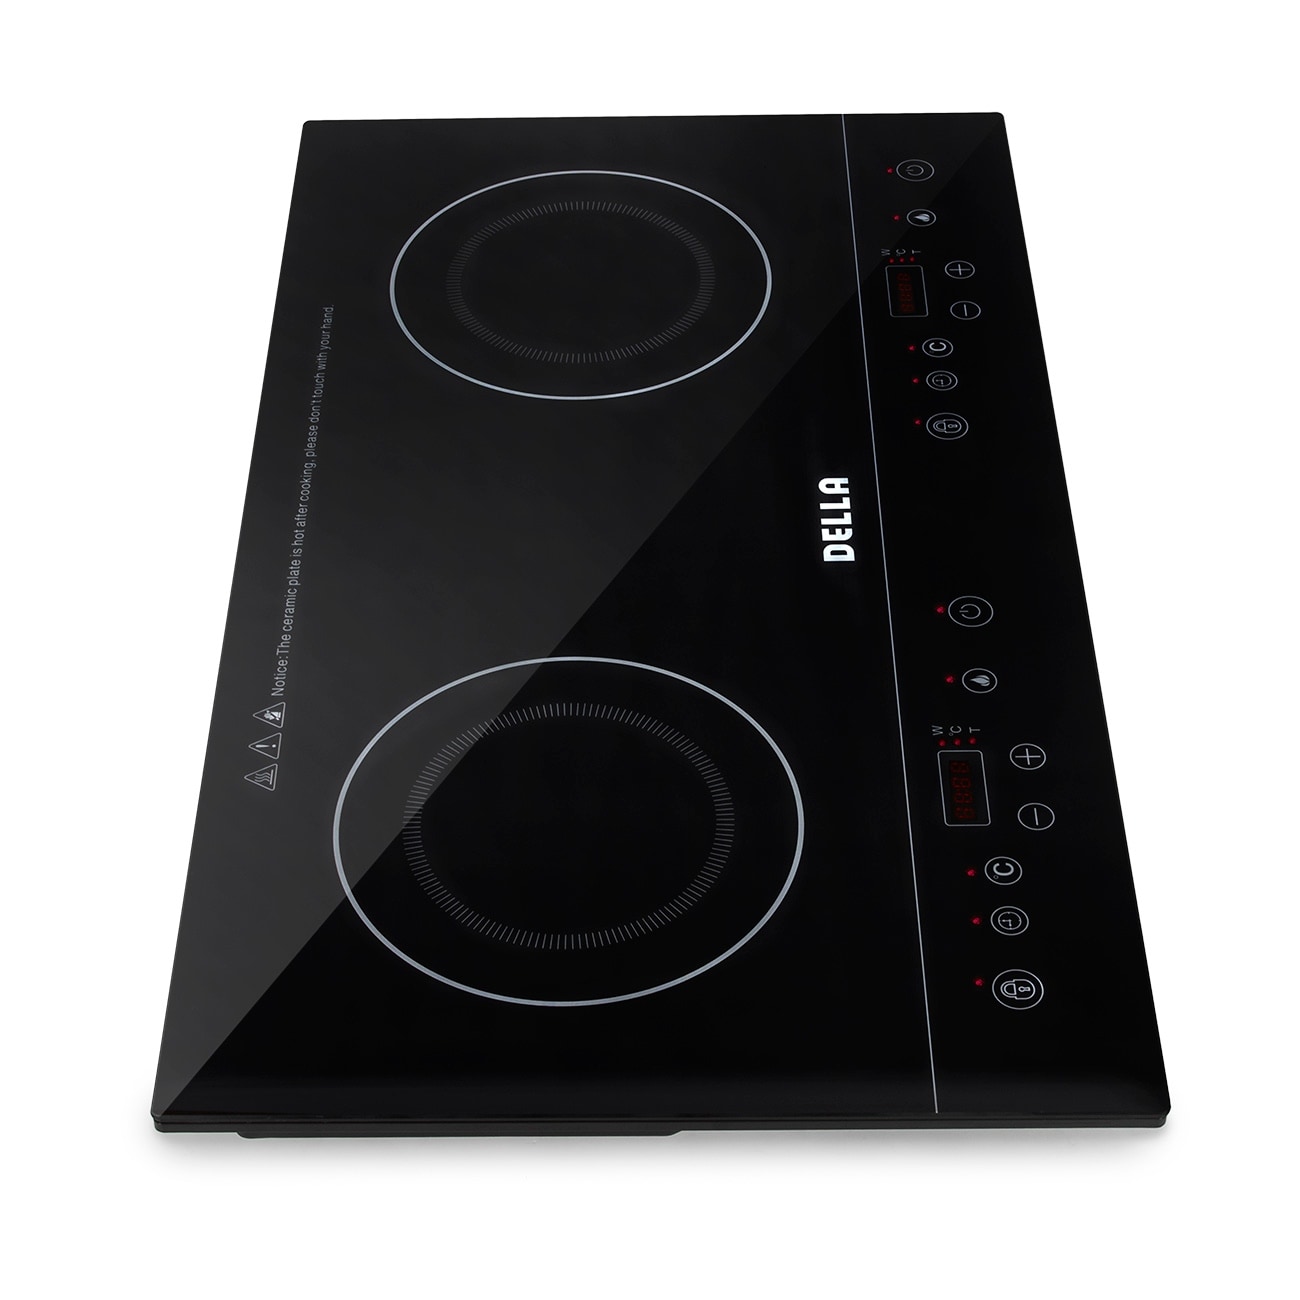 https://ak1.ostkcdn.com/images/products/is/images/direct/1a8958833ed98a1fbfe60d2fc3b571b4ca925458/Della-Dual-Induction-Cooktop-Counter-Top-Electric-Burner-Stove-Portable-Countertop%2C-1800W.jpg